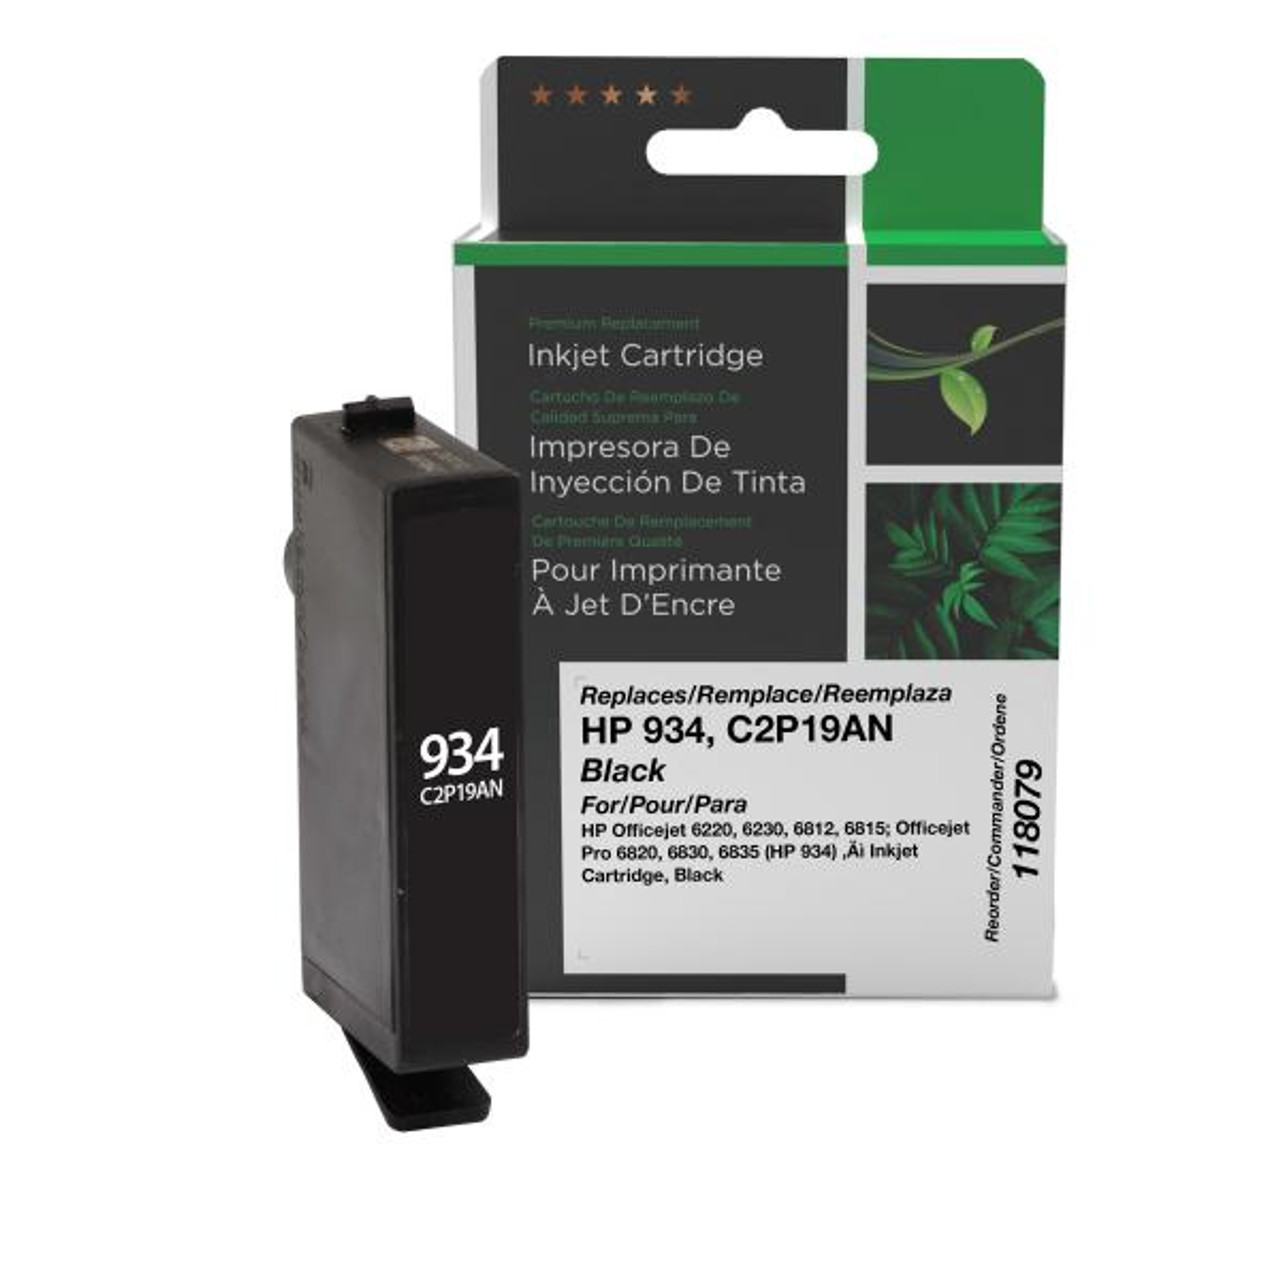 Black Ink Cartridge for HP 934 (C2P19AN)-1